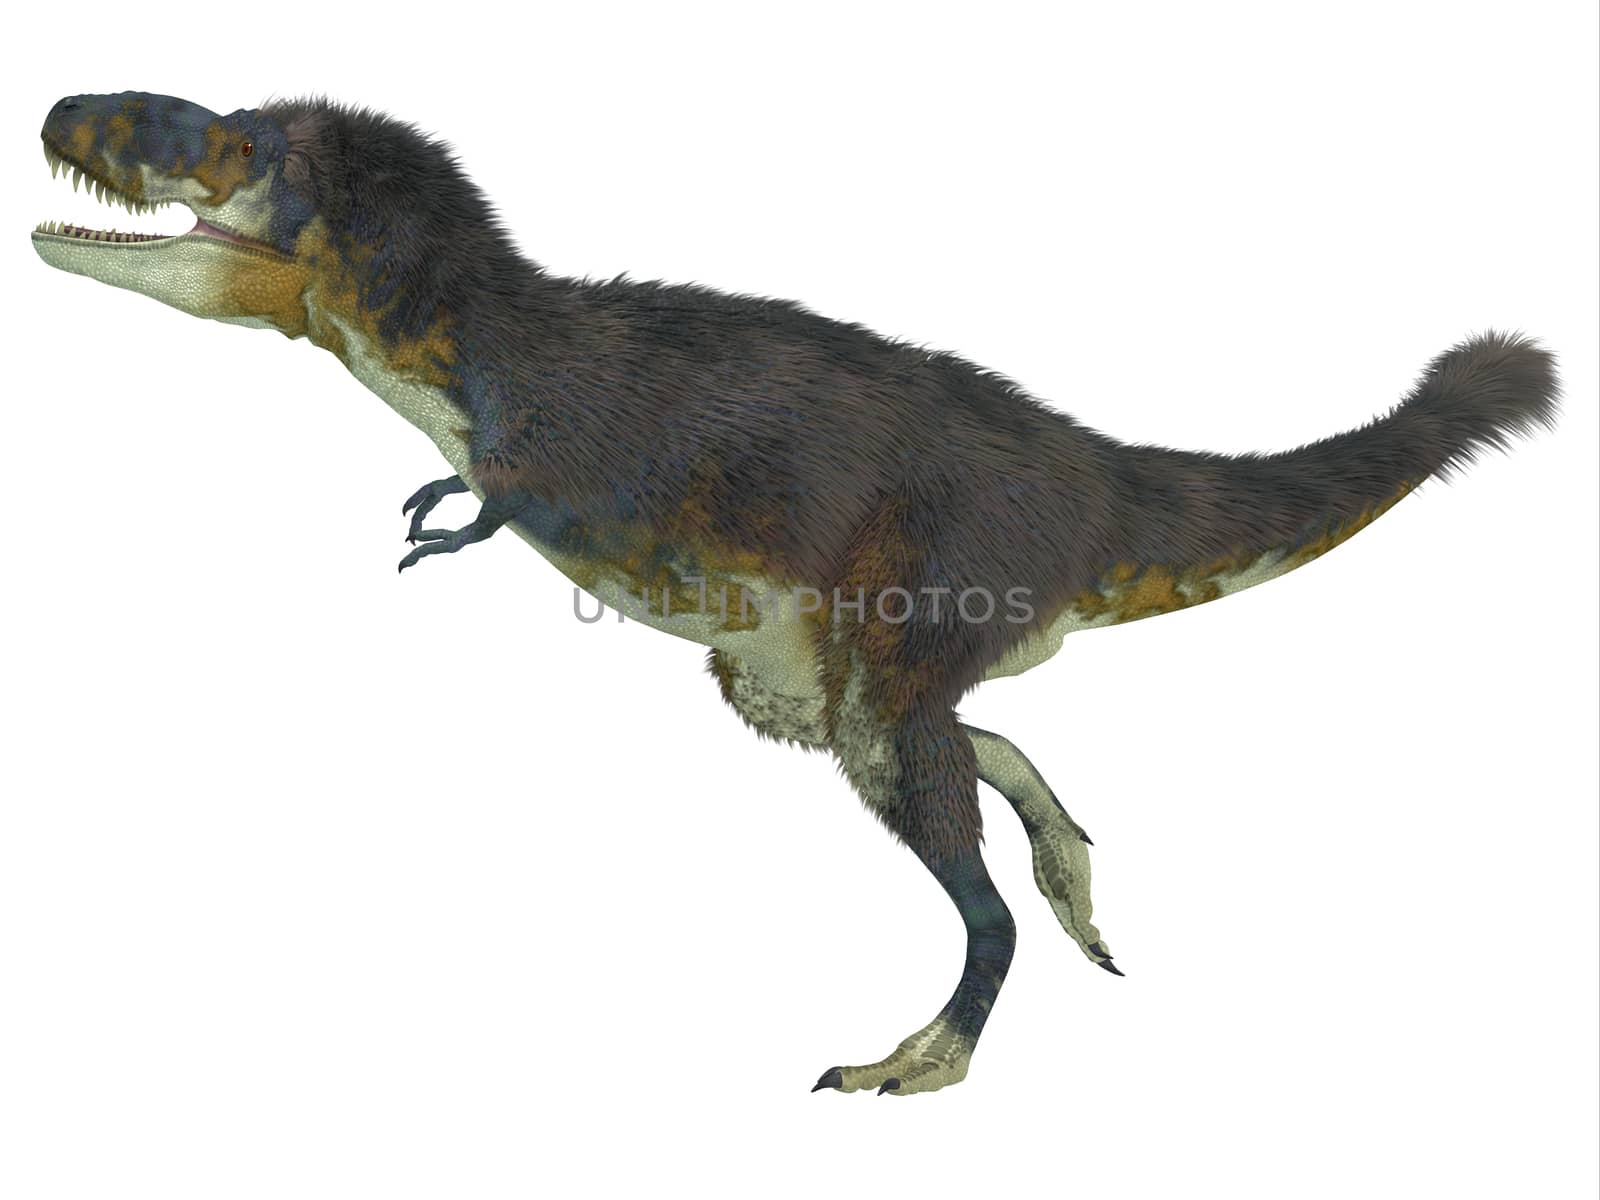 Daspletosaurus was a carnivorous theropod dinosaur that lived during the Cretaceous Period of North America.